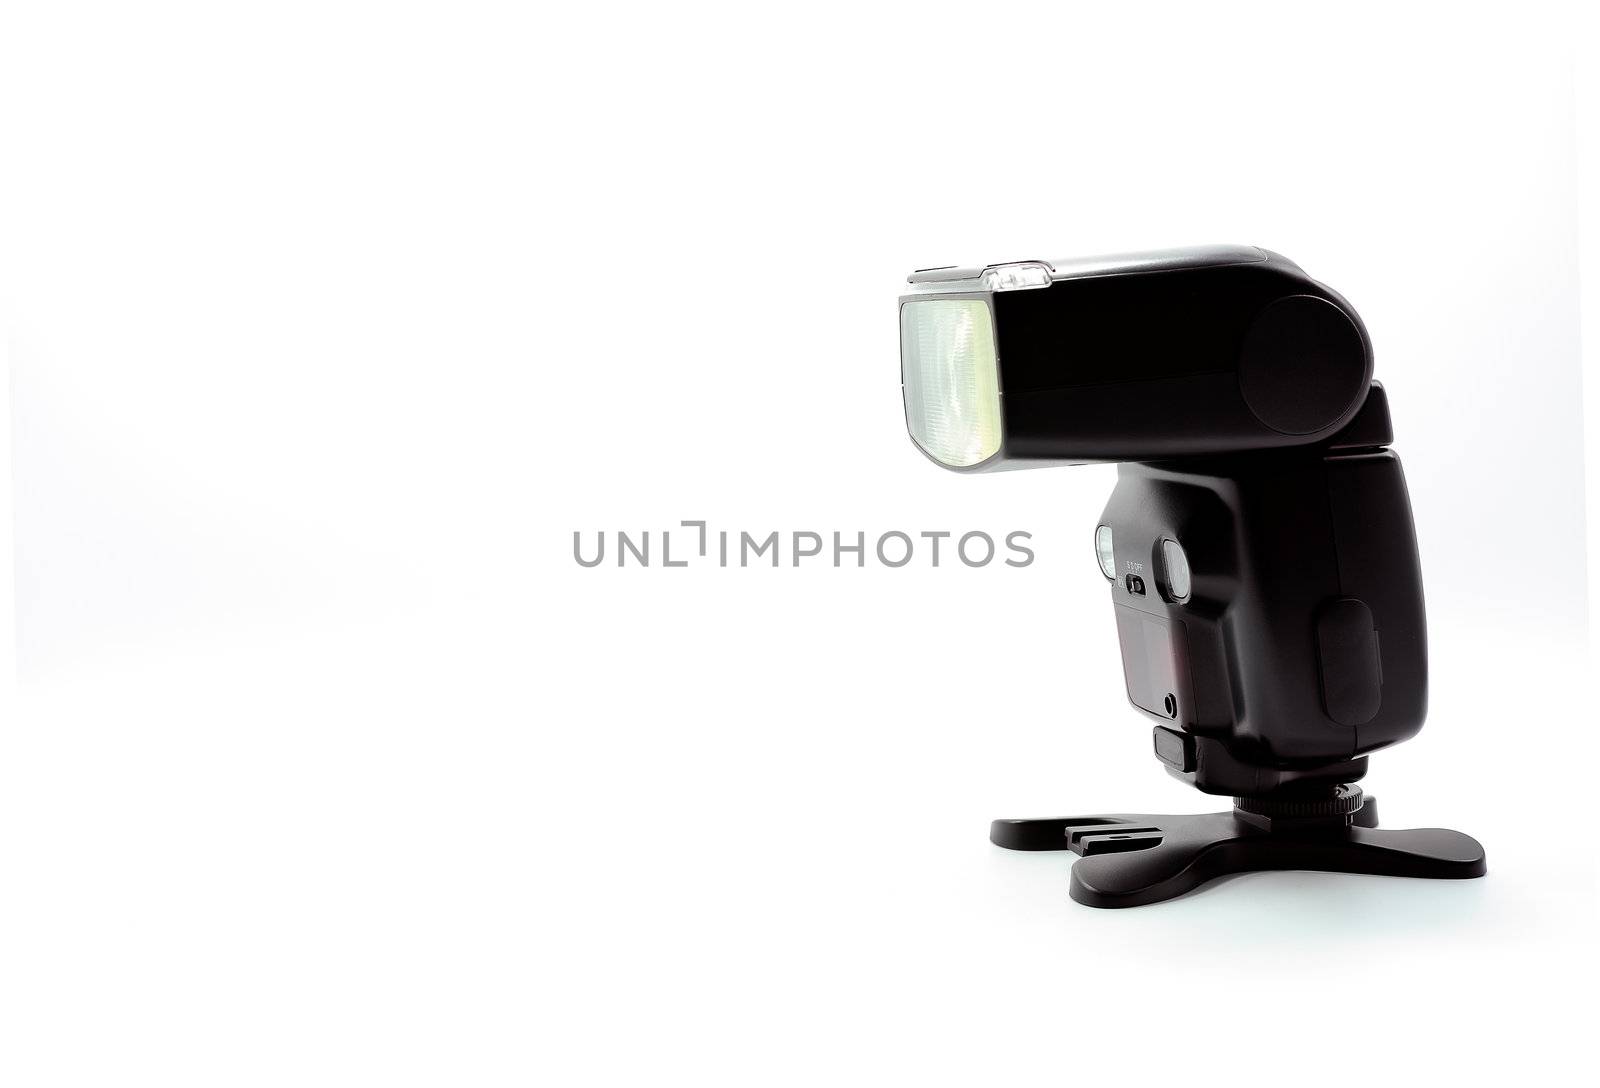 Camera flash light front side view on white back ground by moggara12